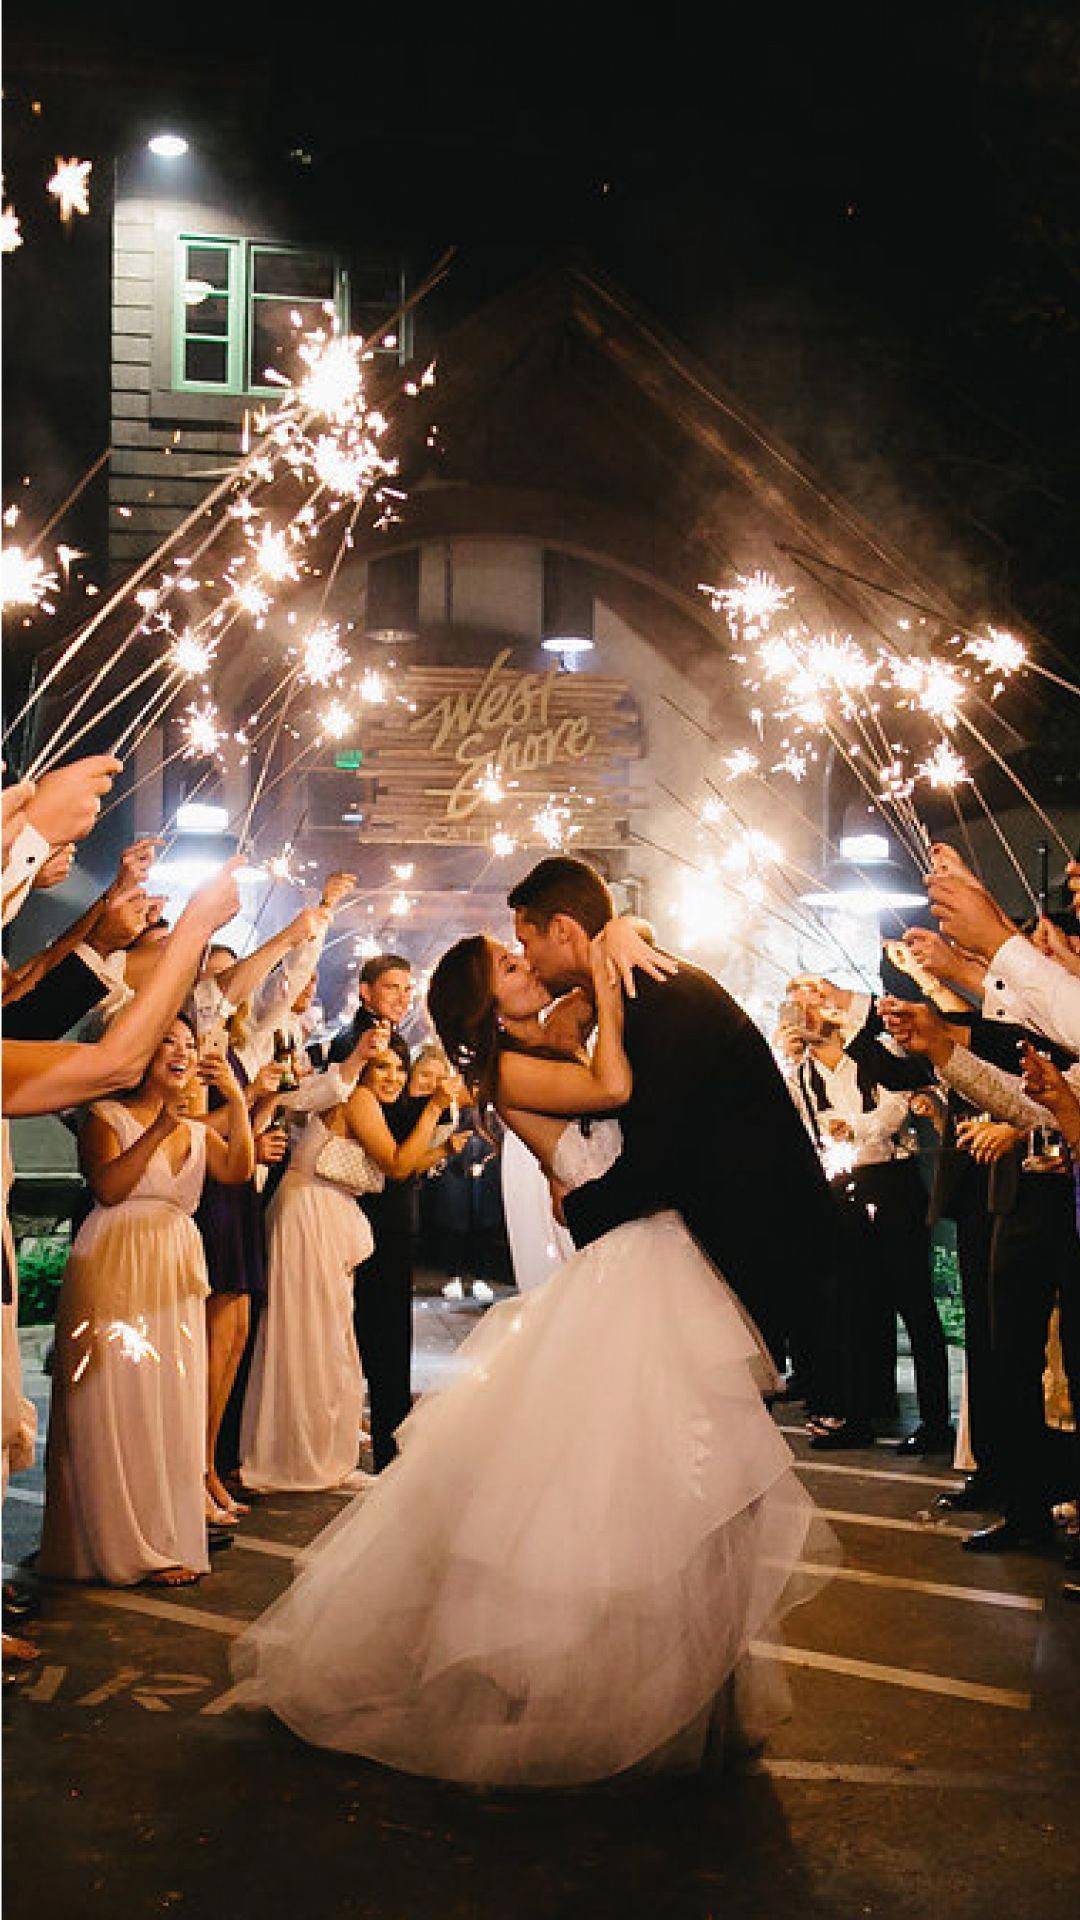 36 Inch Wedding Sparklers Cheap
 36 Inch Sparklers Smokeless Long Sparklers For Weddings